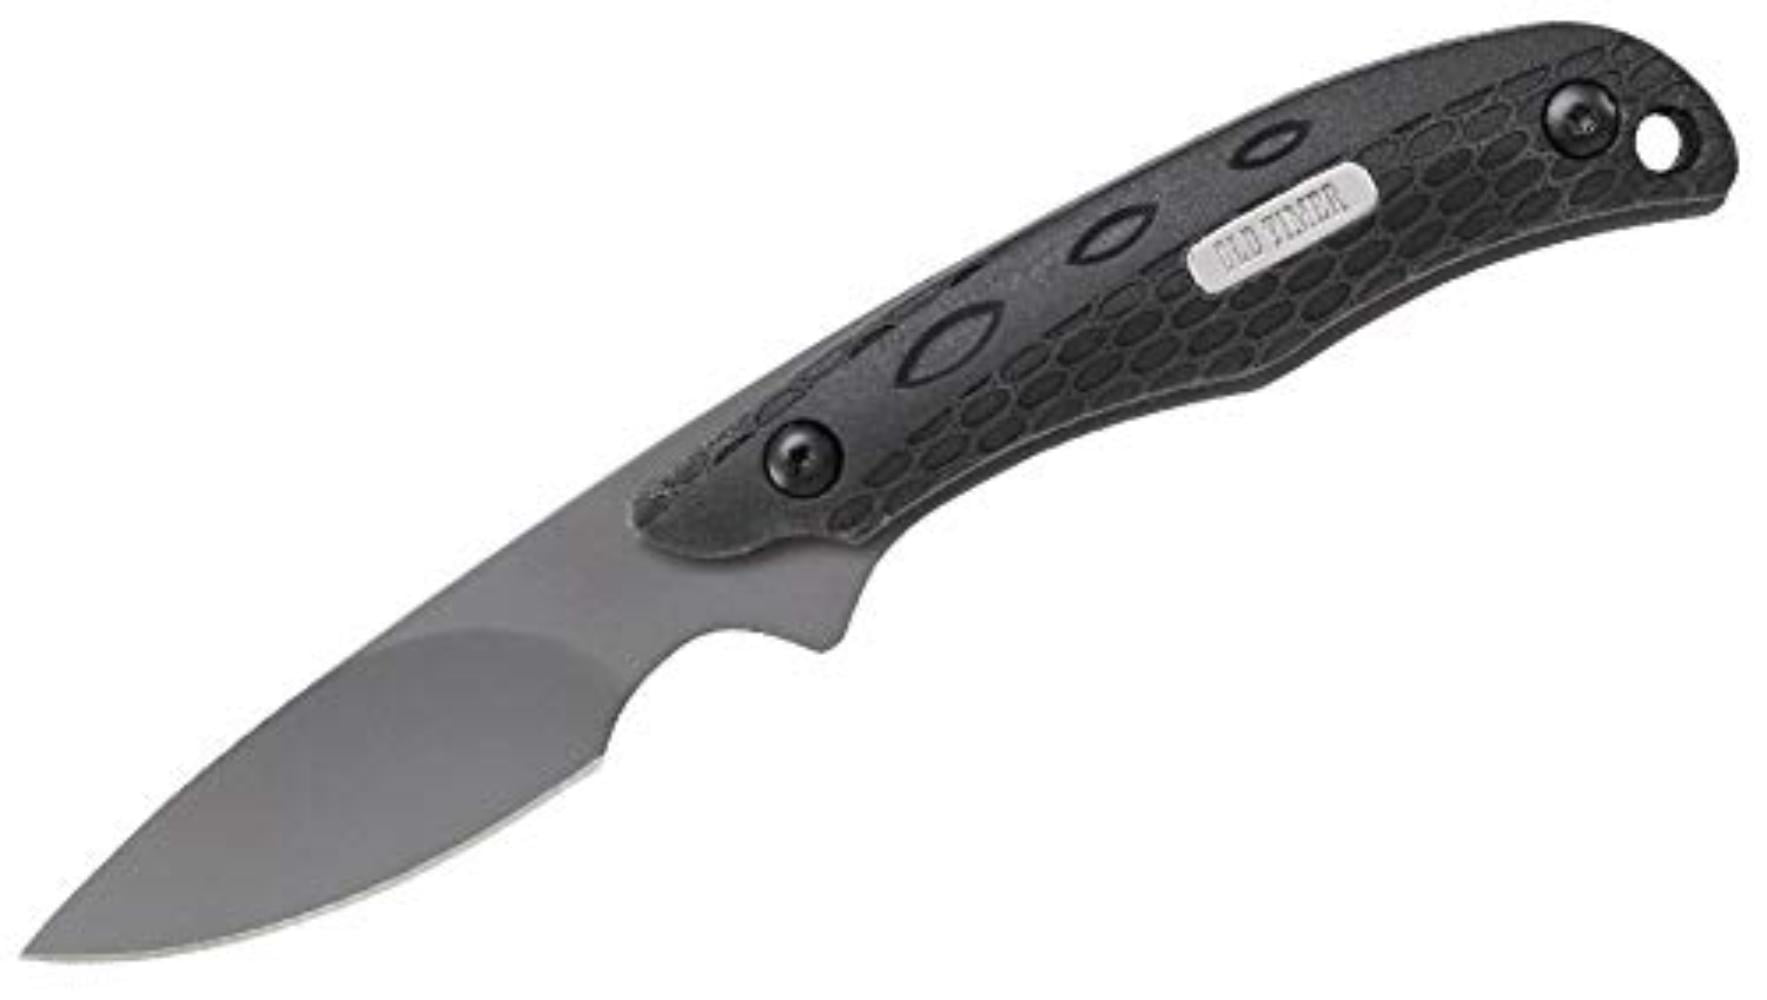 2156OT Copperhead Full Tang Fixed Blade Caping Knife, Titanium Coated 7cr17mov High Carbon Stainless Steel